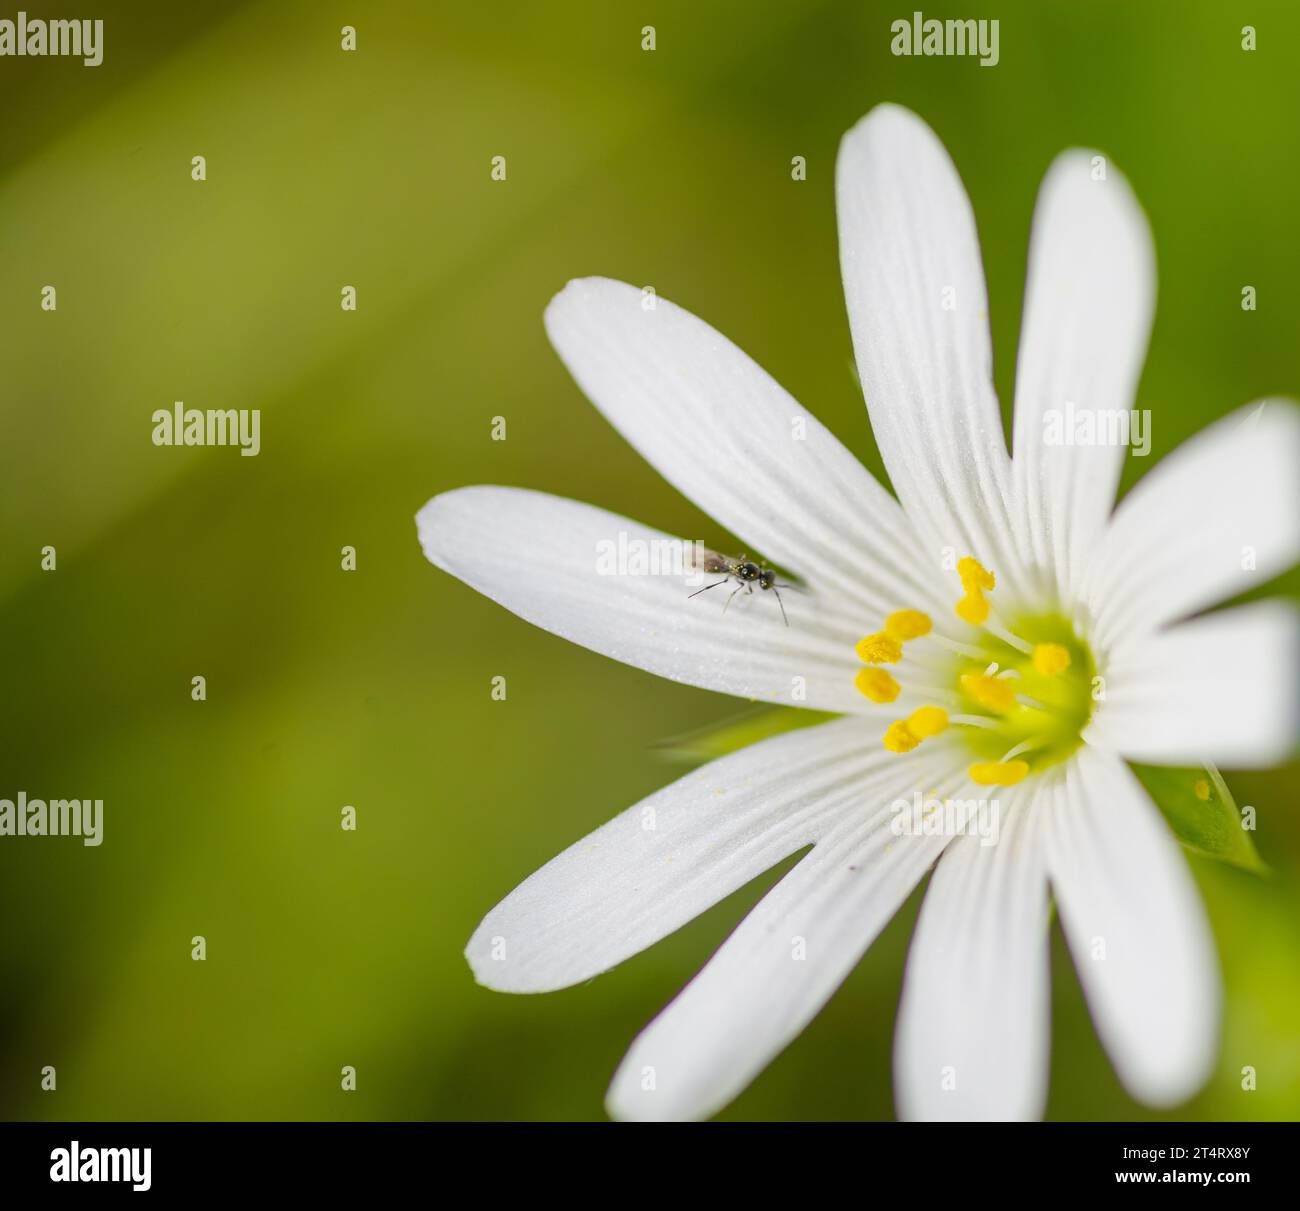 closeup of common chickweed or stellaria media flowers Stock Photo